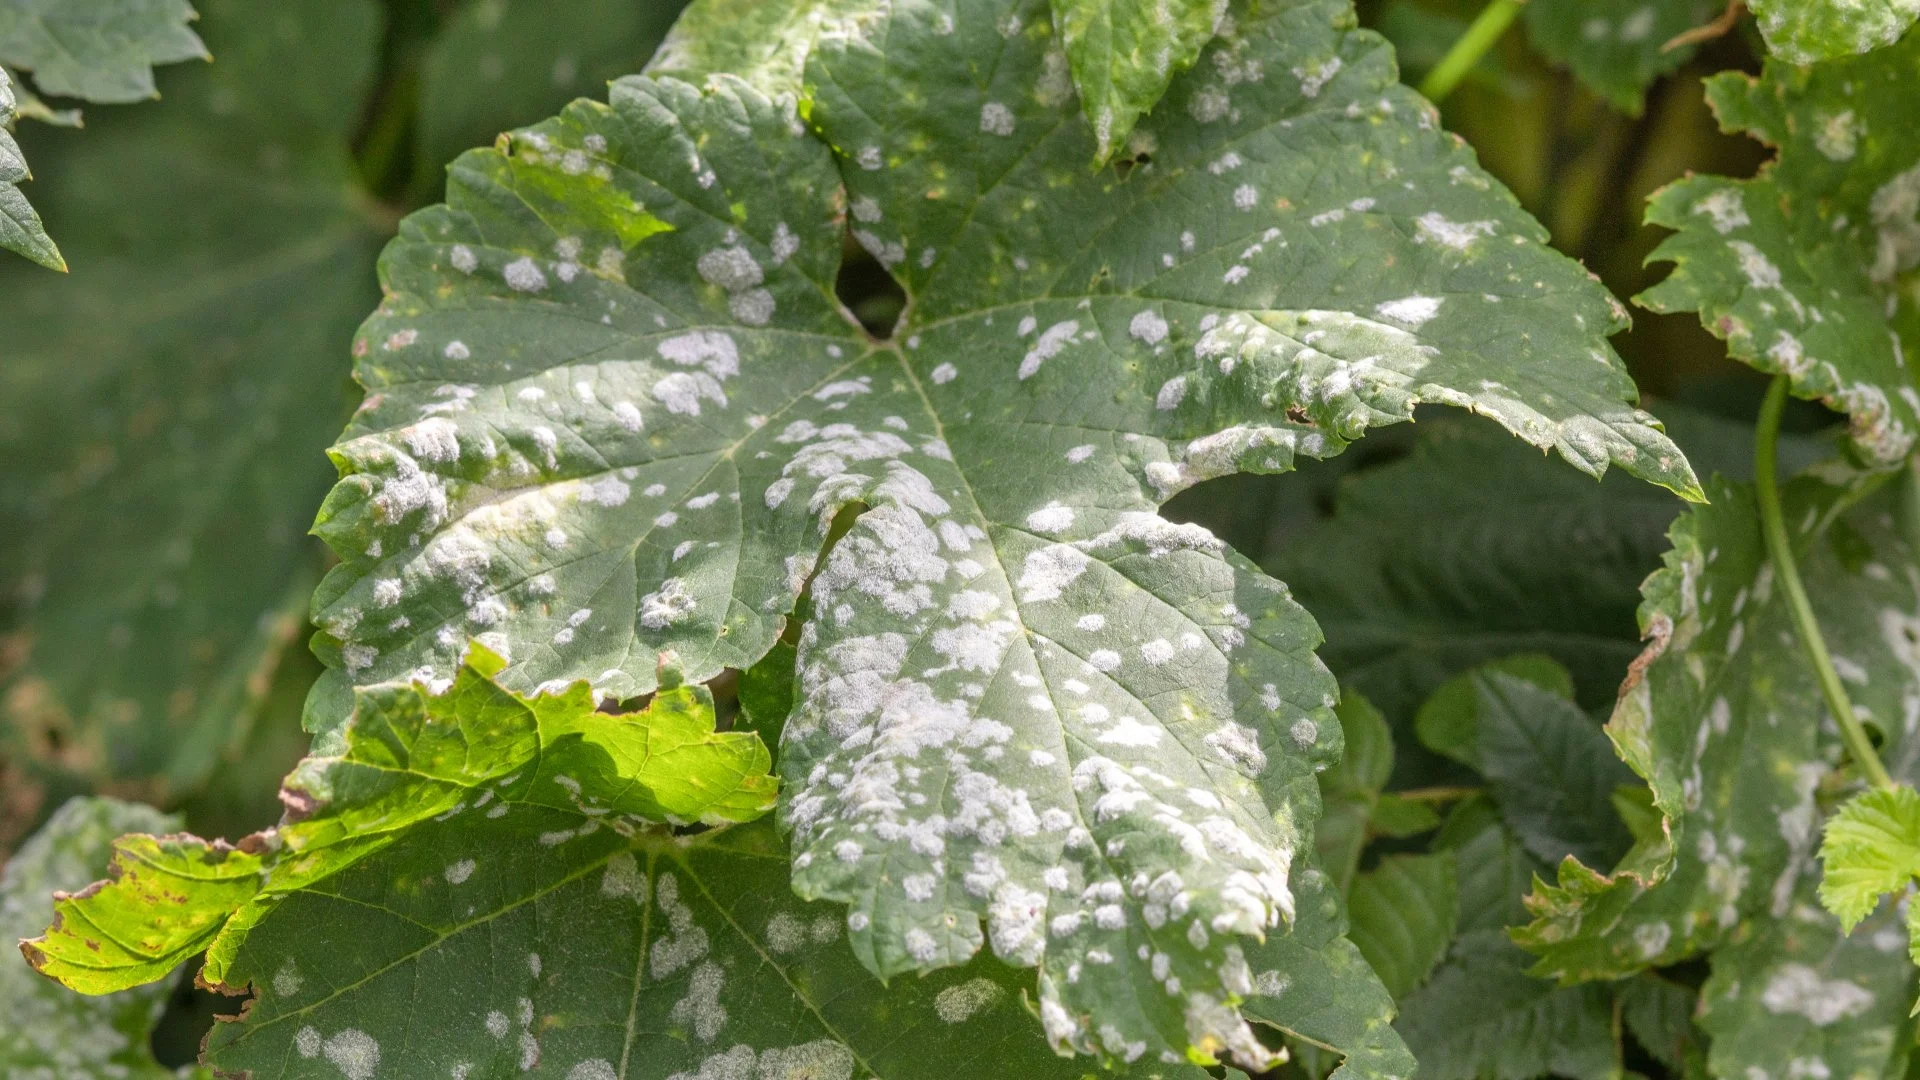 Plant Diseases Commonly Found Infecting Trees & Shrubs in Tennessee